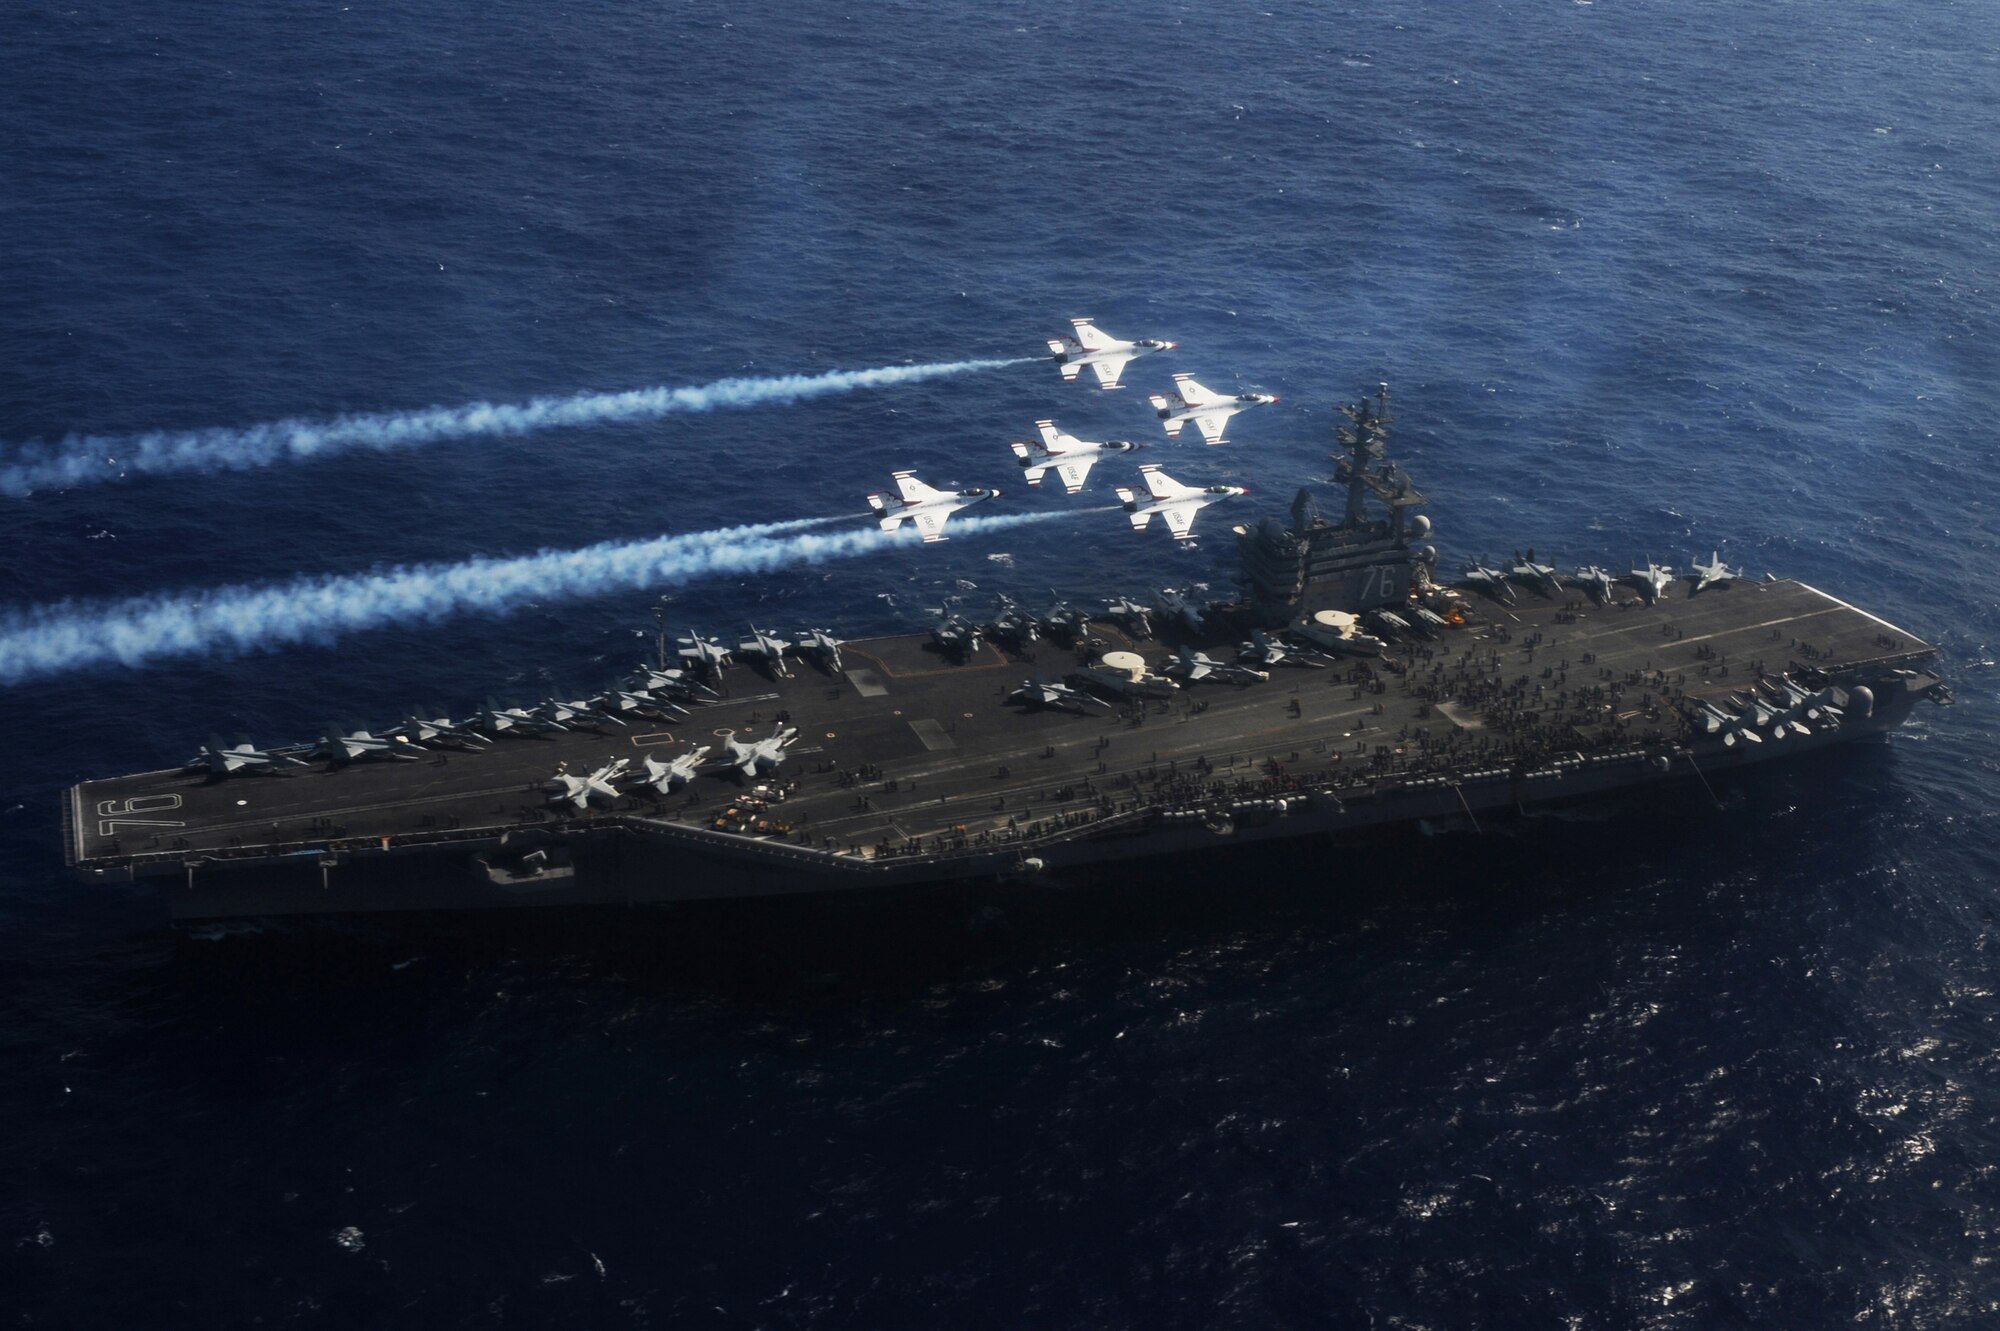 The U.S. Air Force Thunderbird "stinger" formation flies over the U.S.S. Ronald Reagan, a Nimitz-class nuclear-powered supercarrier in the service of the U. S. Navy, prior to beginning their practice at Andersen Air Force Base, Guam, Oct. 6.  (U.S. Air Force photo by Staff Sgt. Kristi Machado)